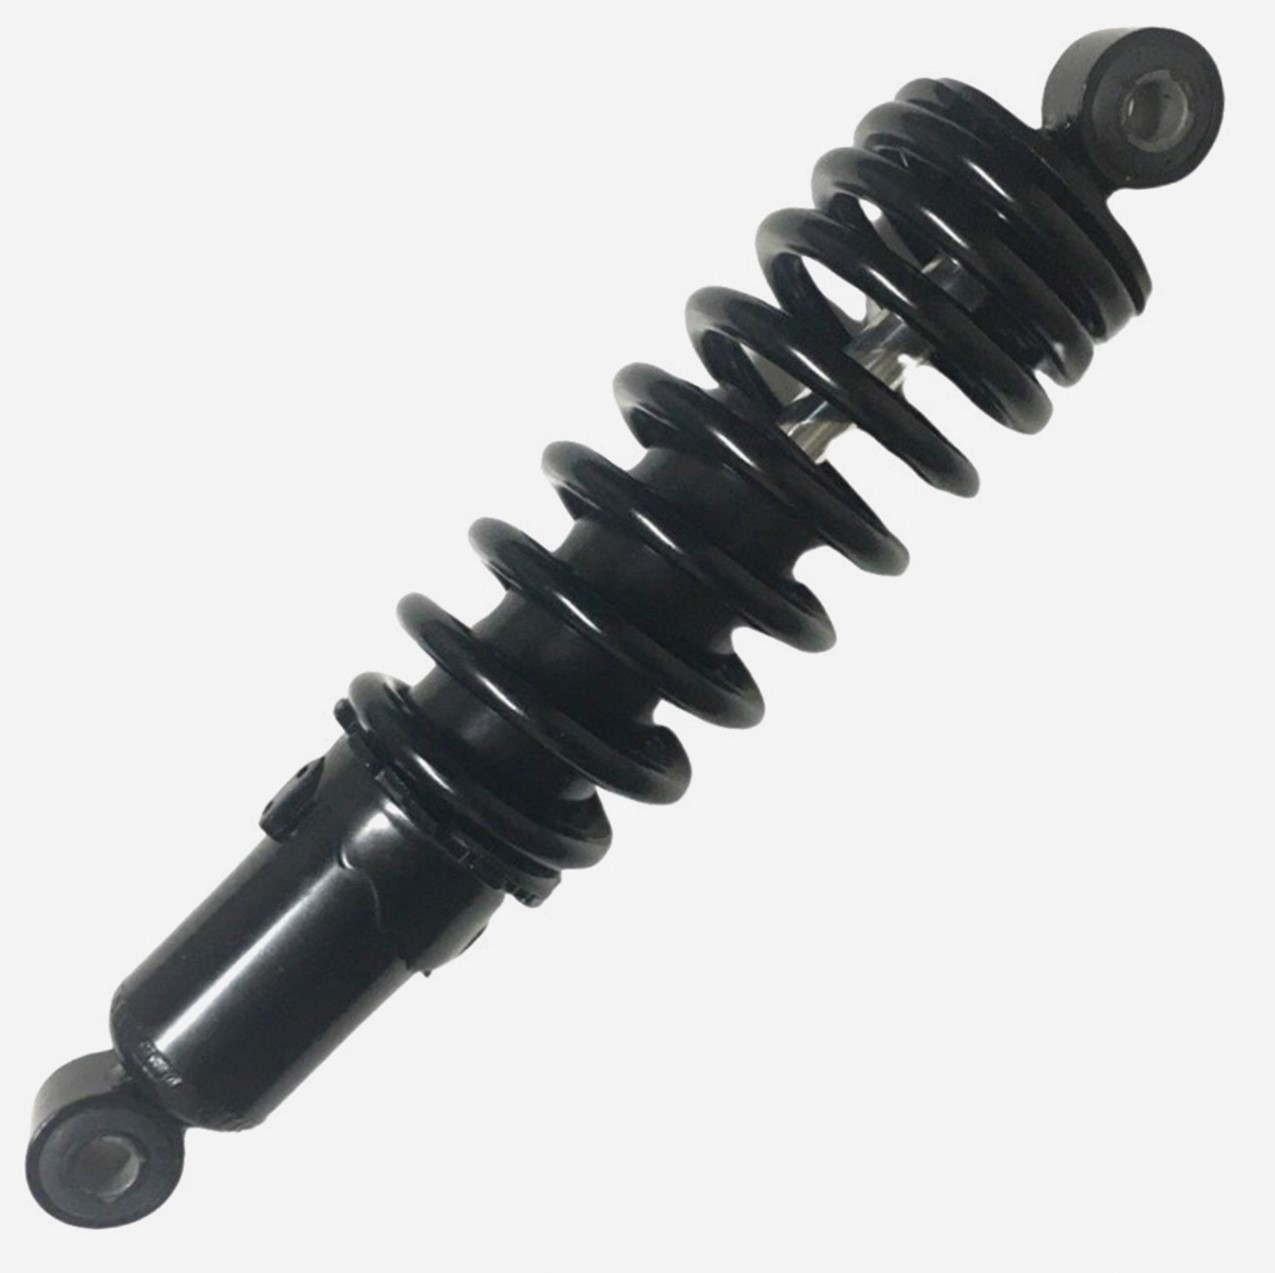 Rear Shock Eye c/c=10 5/8 Spring Ht=6in Spring OD=65mm Spring Thickness=8.6mm Bolt ID Top=10 Bottom=10 Fits Many 125-250cc ATVs - Click Image to Close